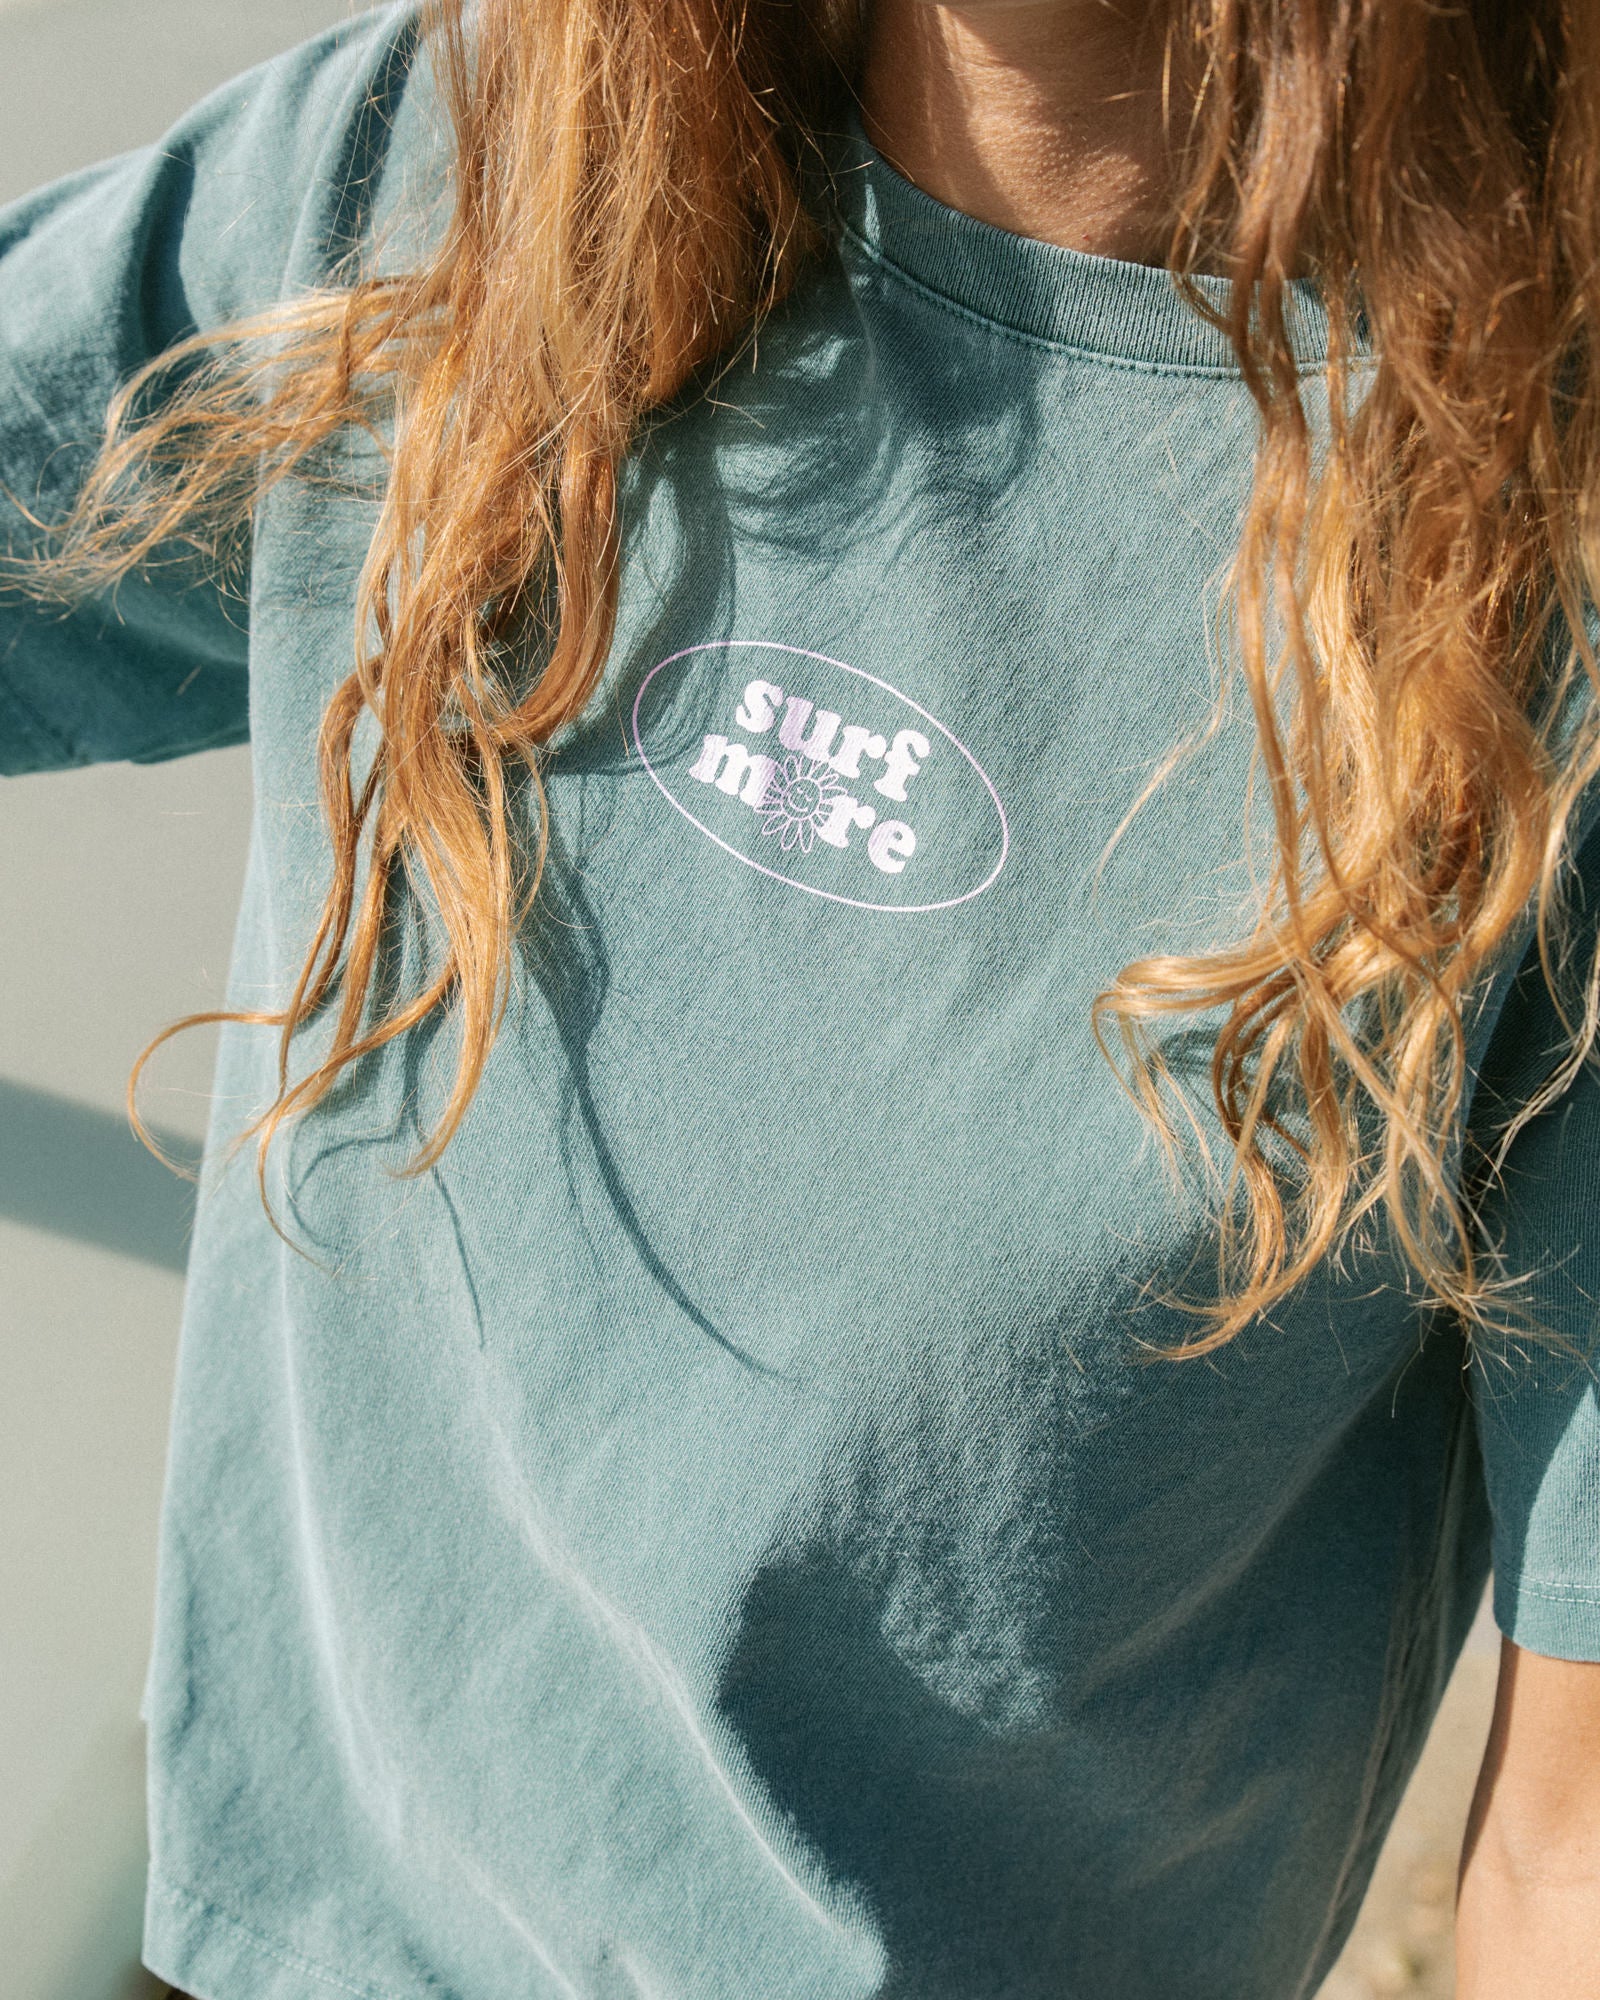 Surf More - Women’s Boxy Tee